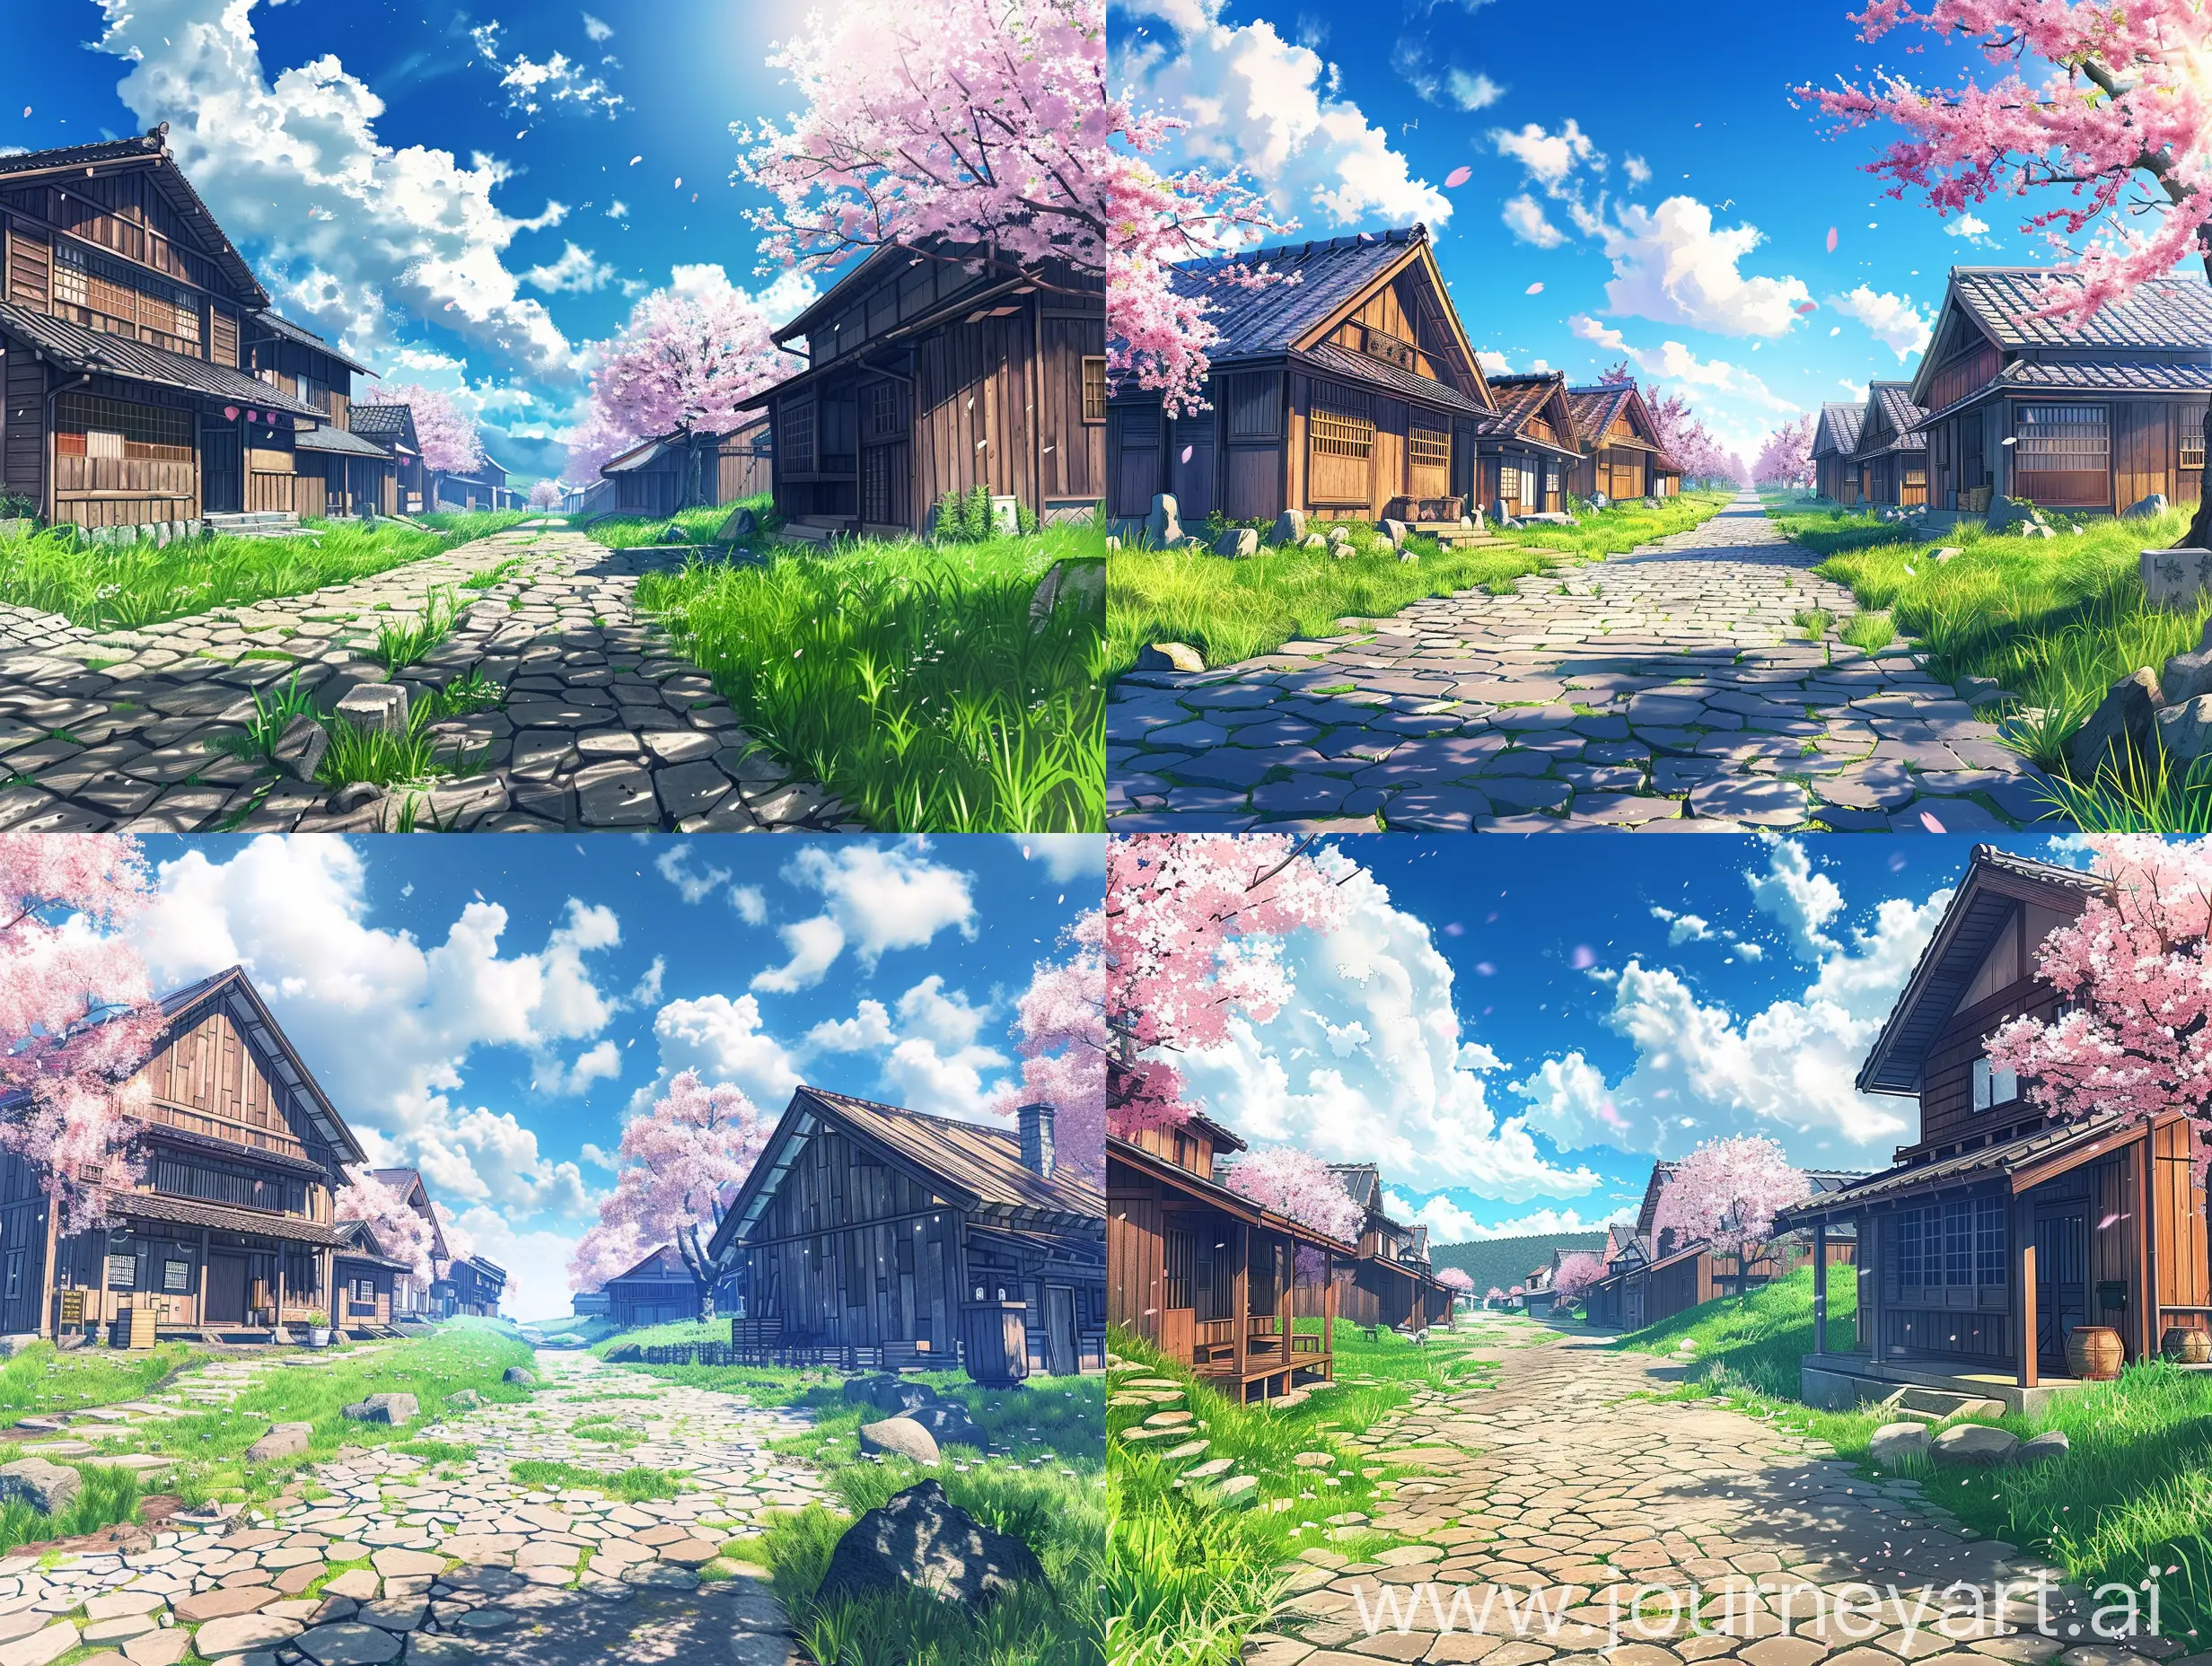 Rural Japan, wooden houses, grasslands with sakura trees, stone roads, sunshine and a blue sky with white clouds.  My place is empty, anime style.